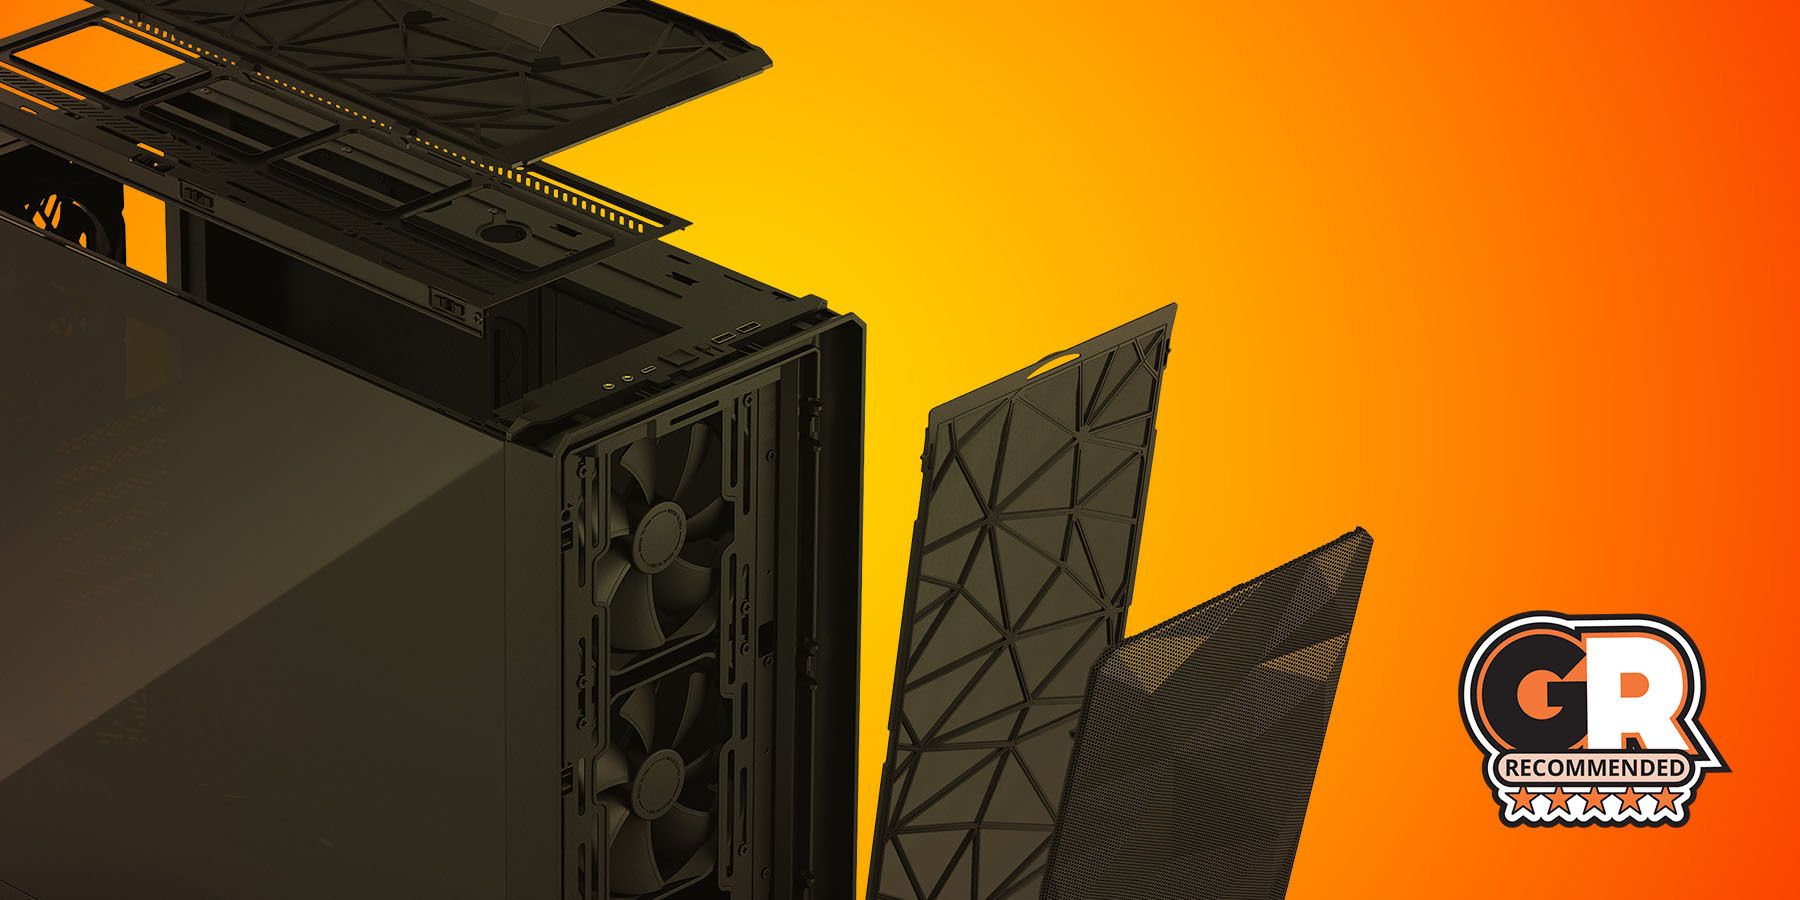 The Best PC Cases for Airflow in 2023